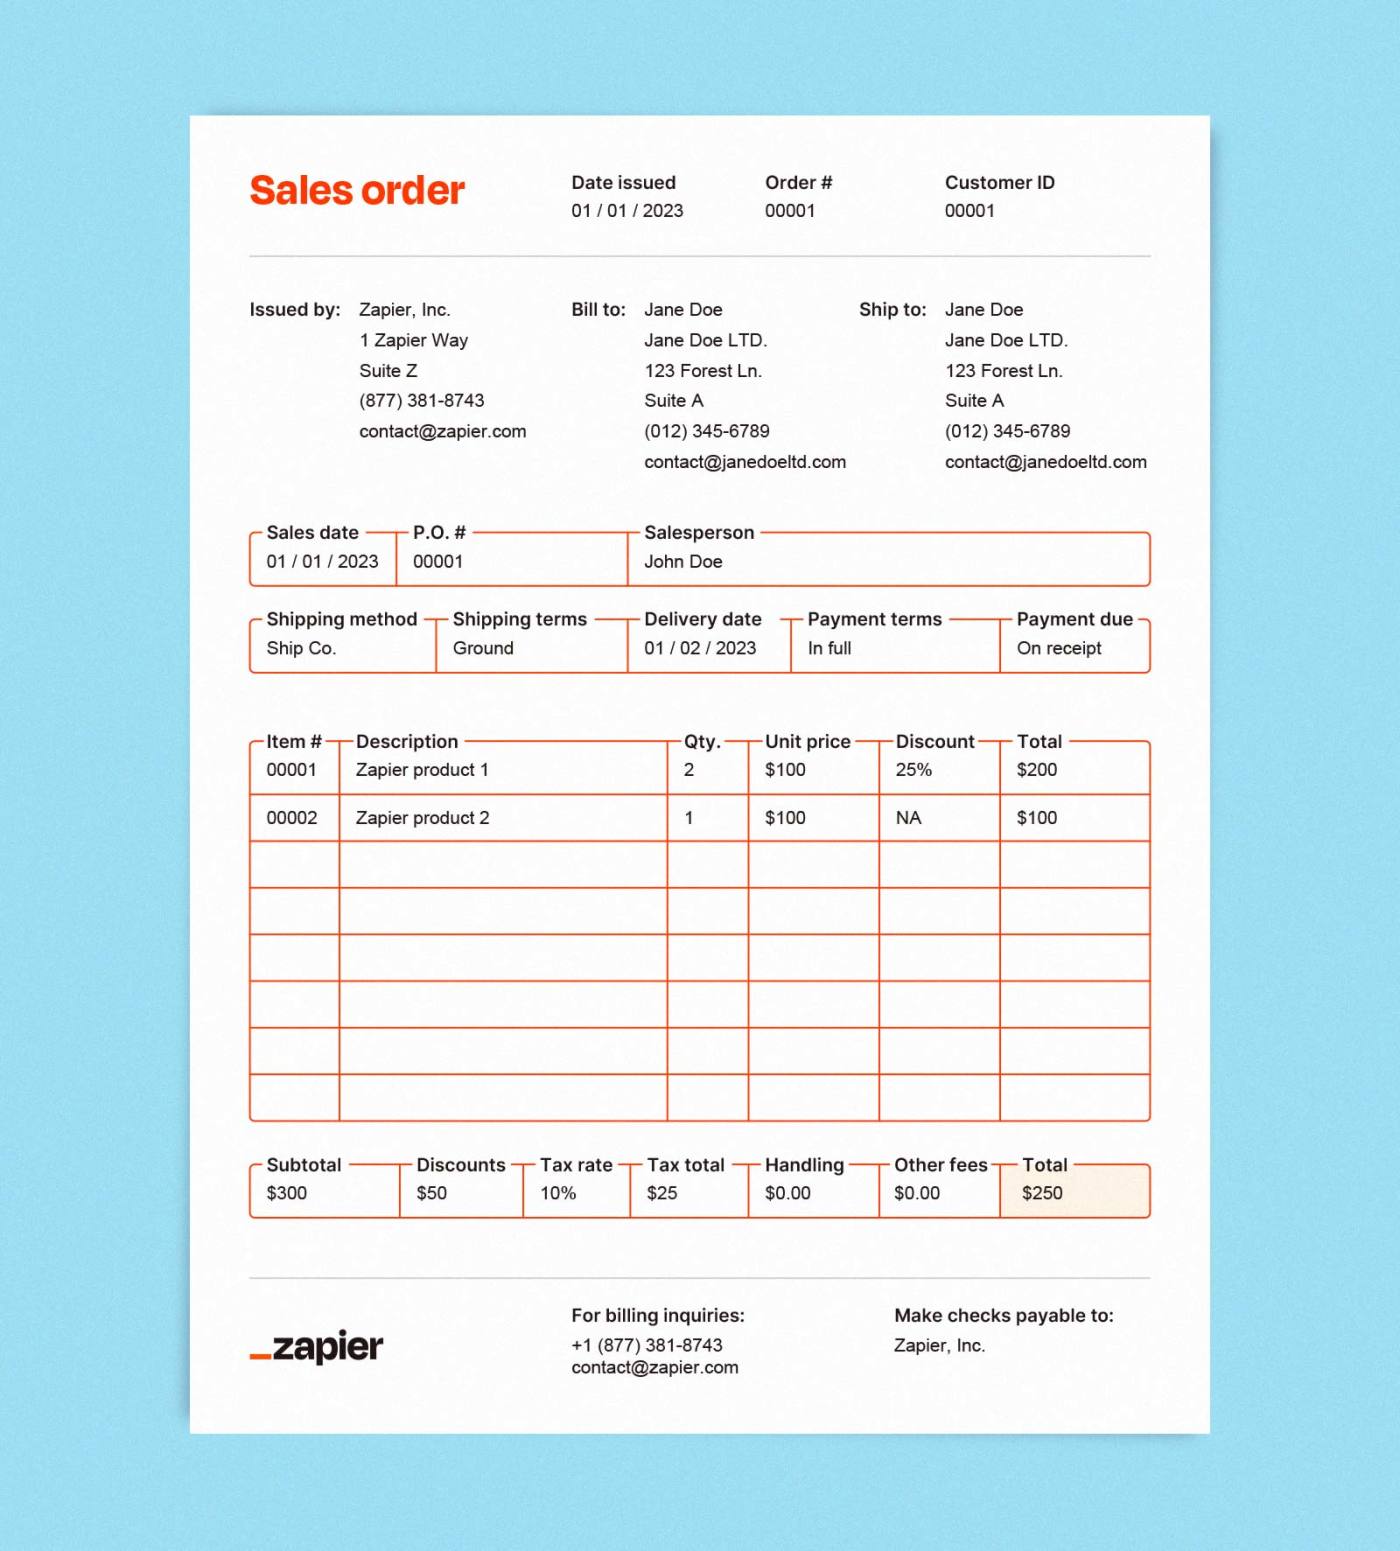 Example mockup or a sales order on a blue background